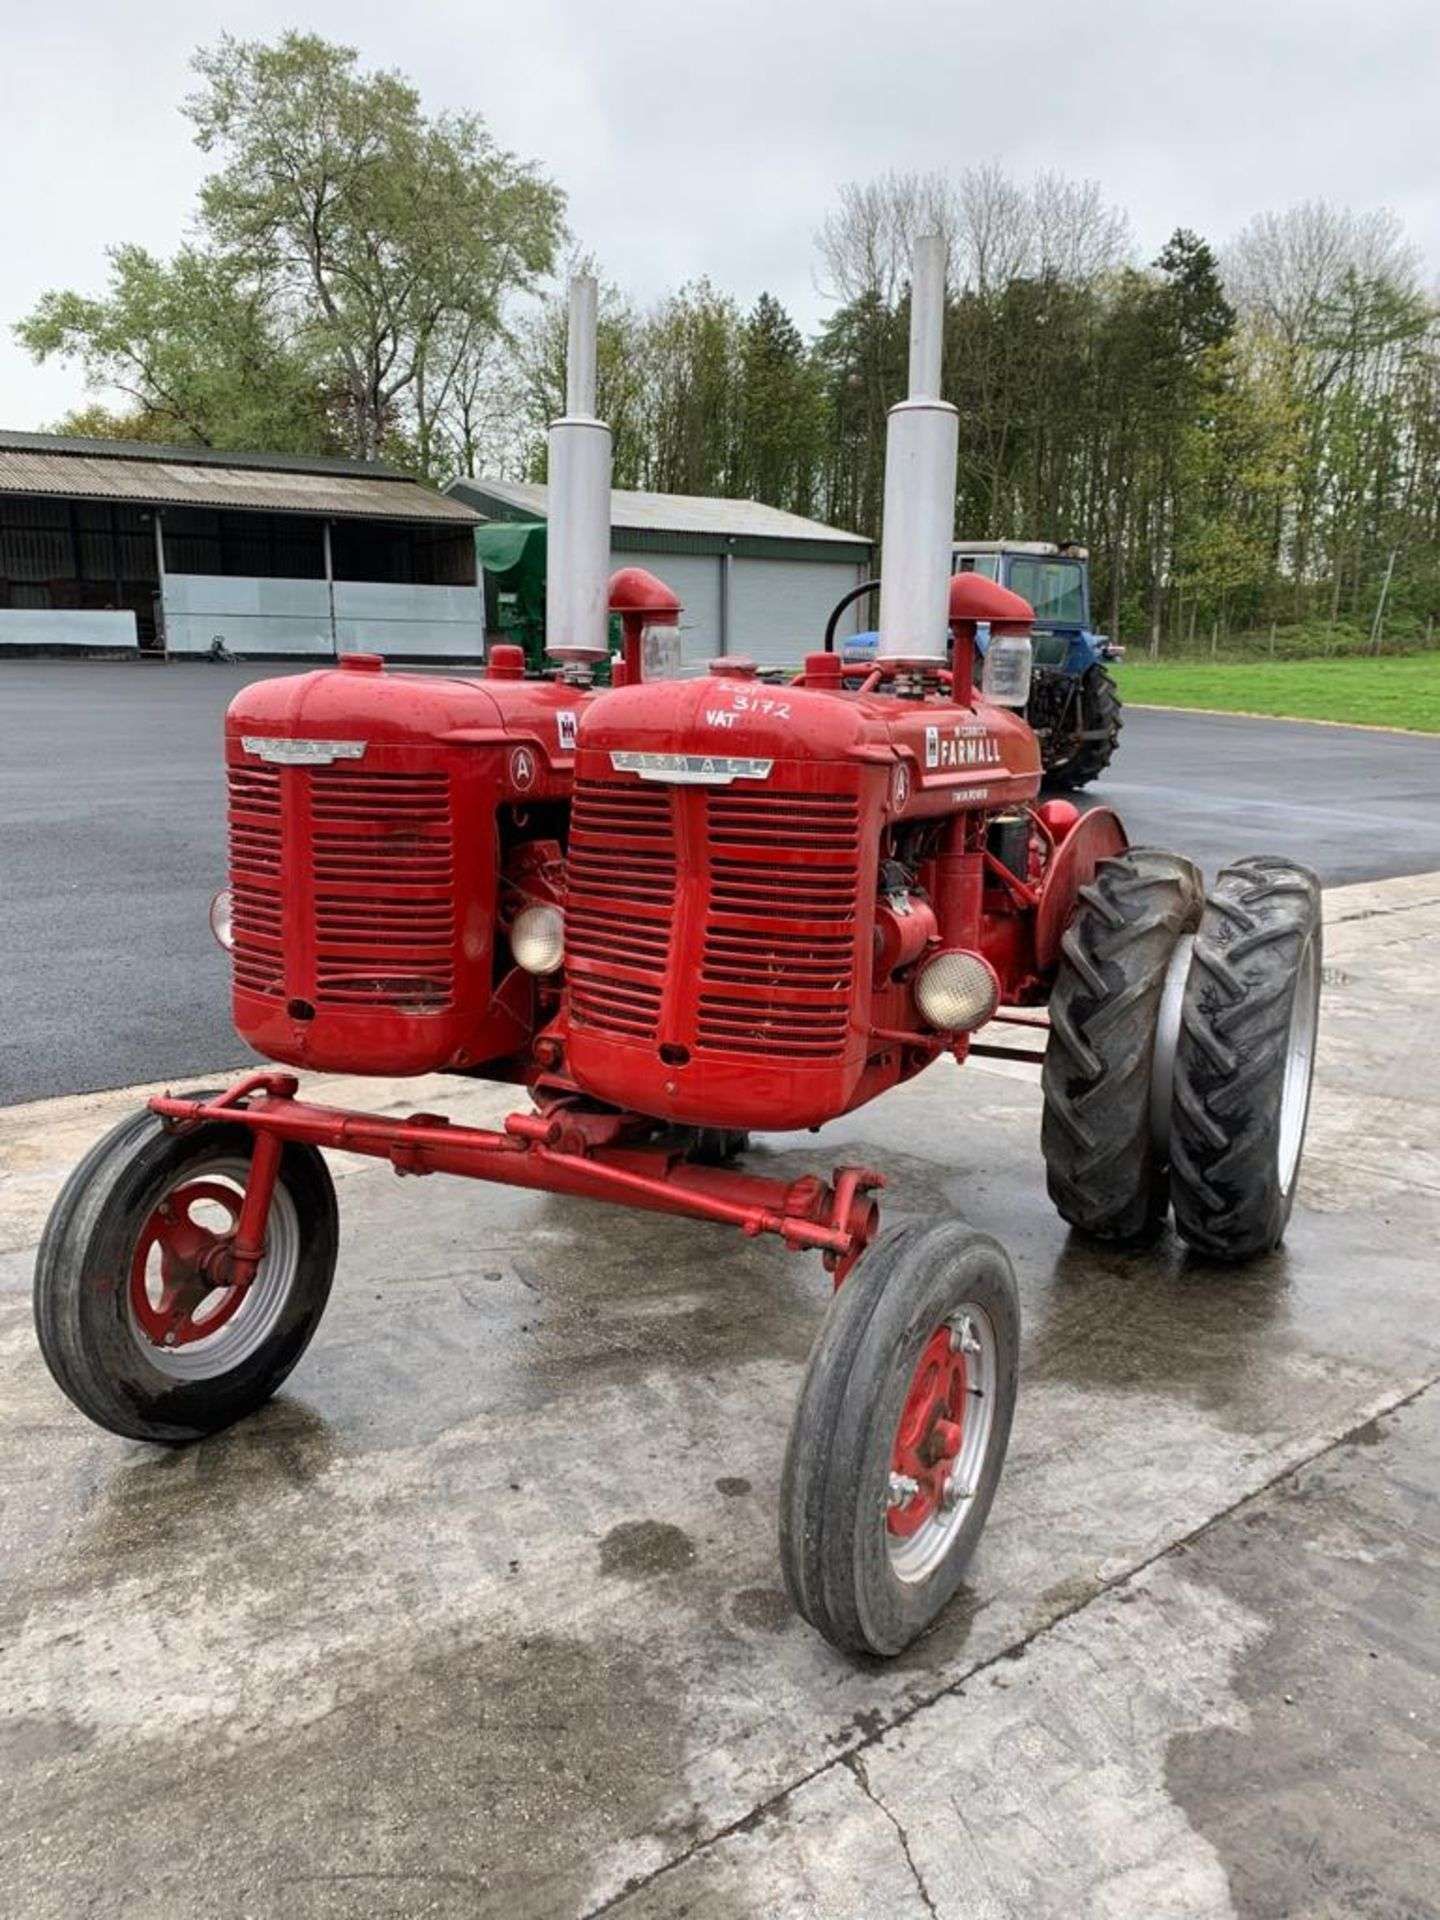 MCCORMICK FARMALL A TWIN POWER TWIN ENGINED VINTAGE TRACTOR *PLUS VAT*